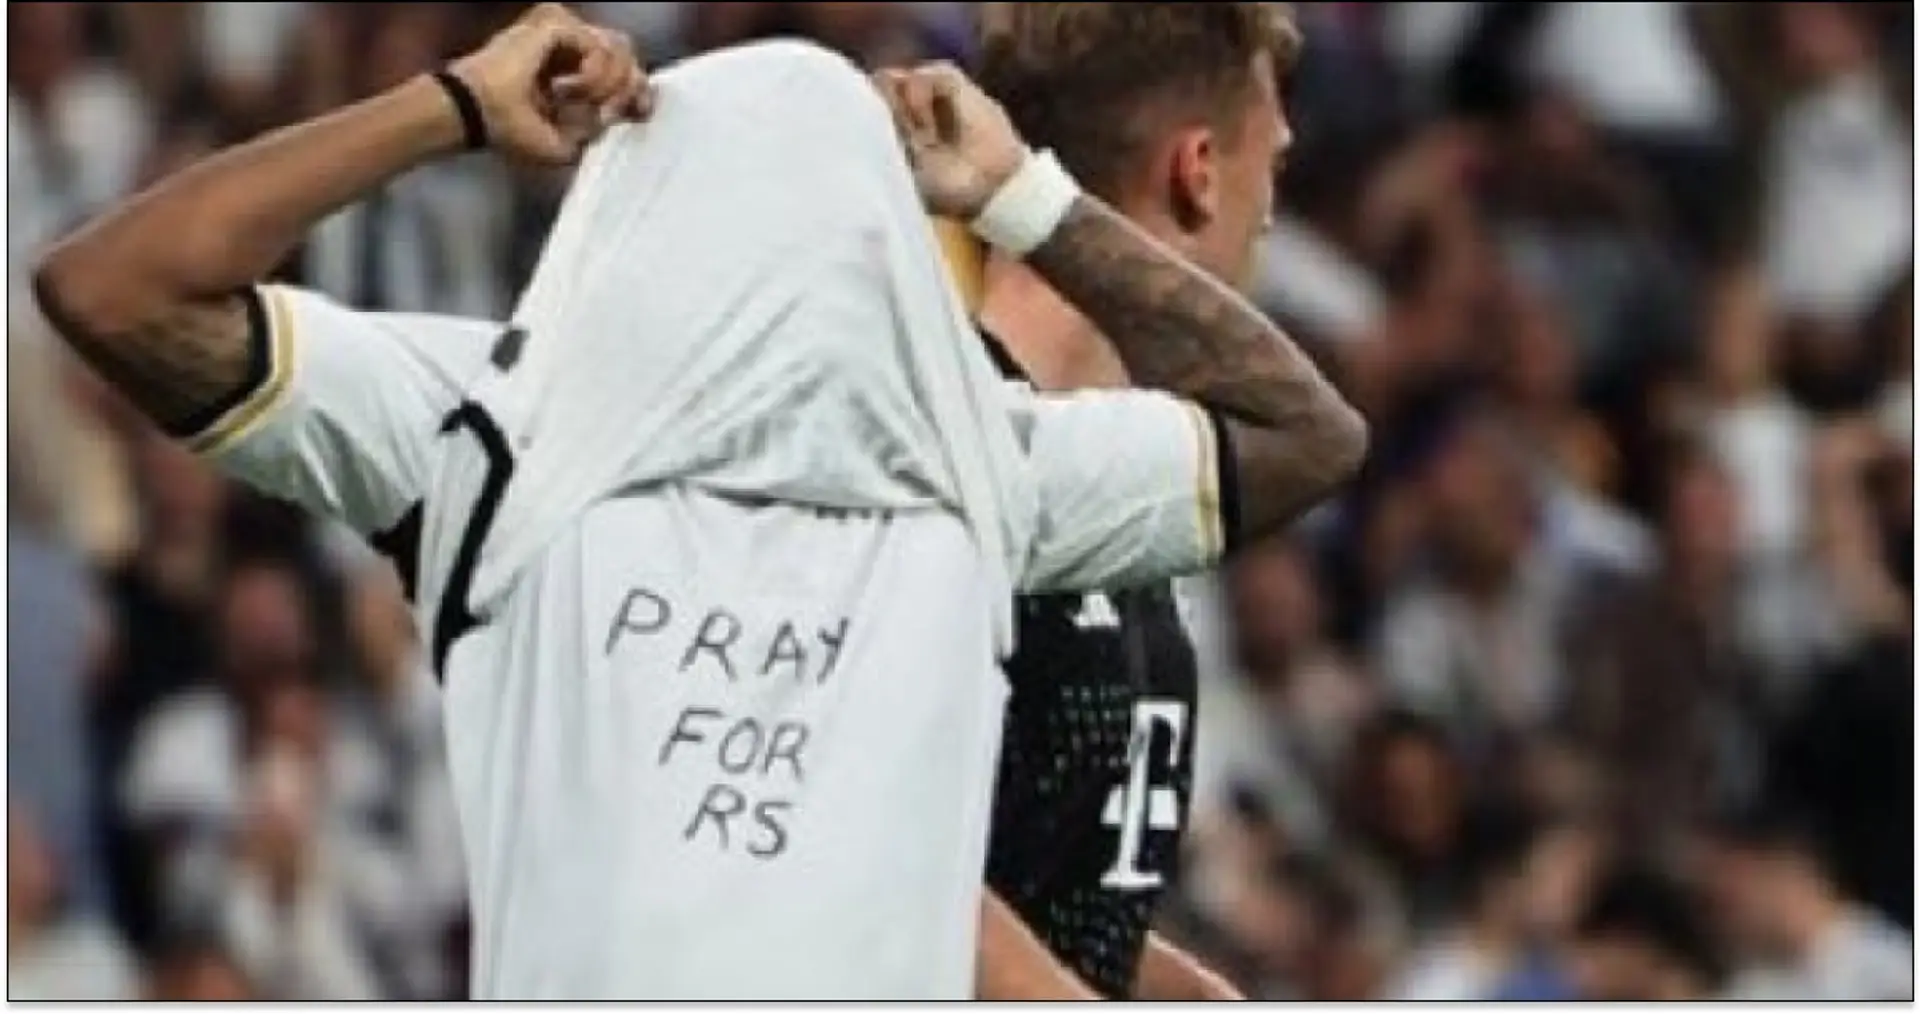 'Pray for RS' — What Rodrydo's message under his shirt means